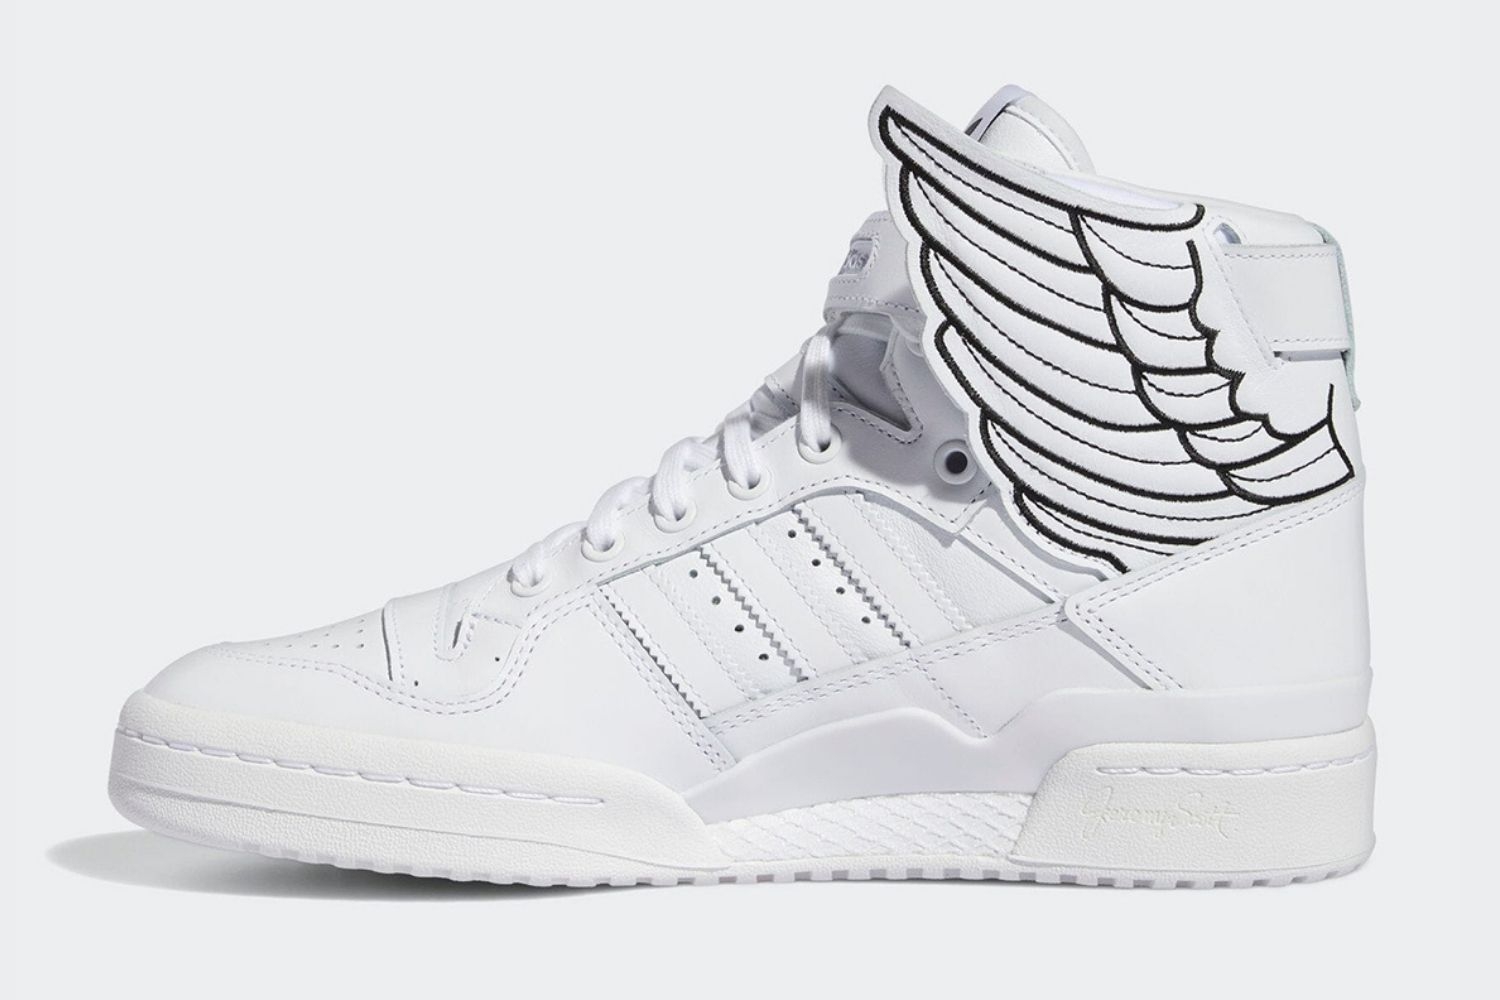 Jeremy Scott and adidas release the Forum Wings 4.0